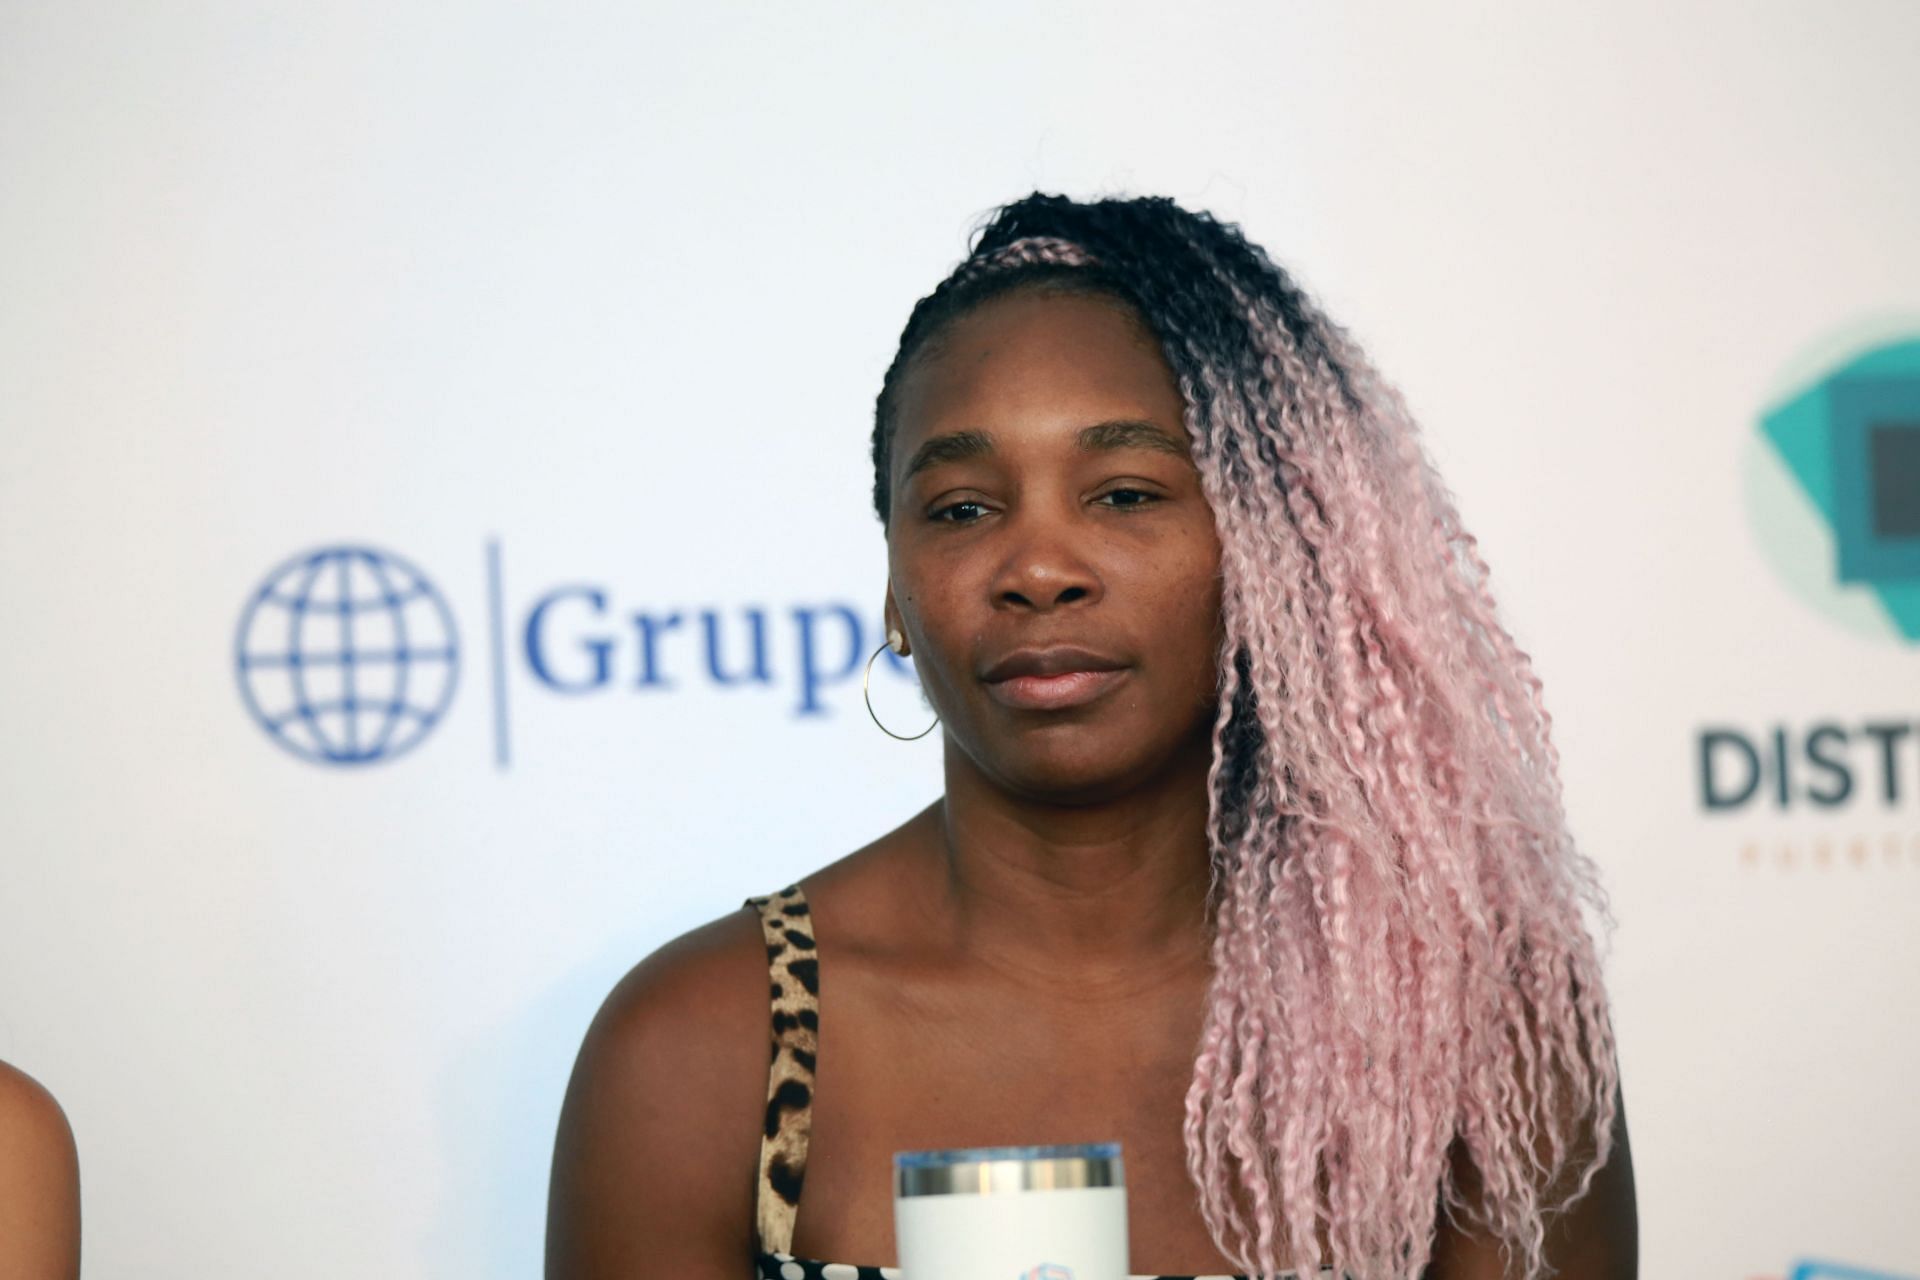 American tennis player Venus Williams at a press conference.